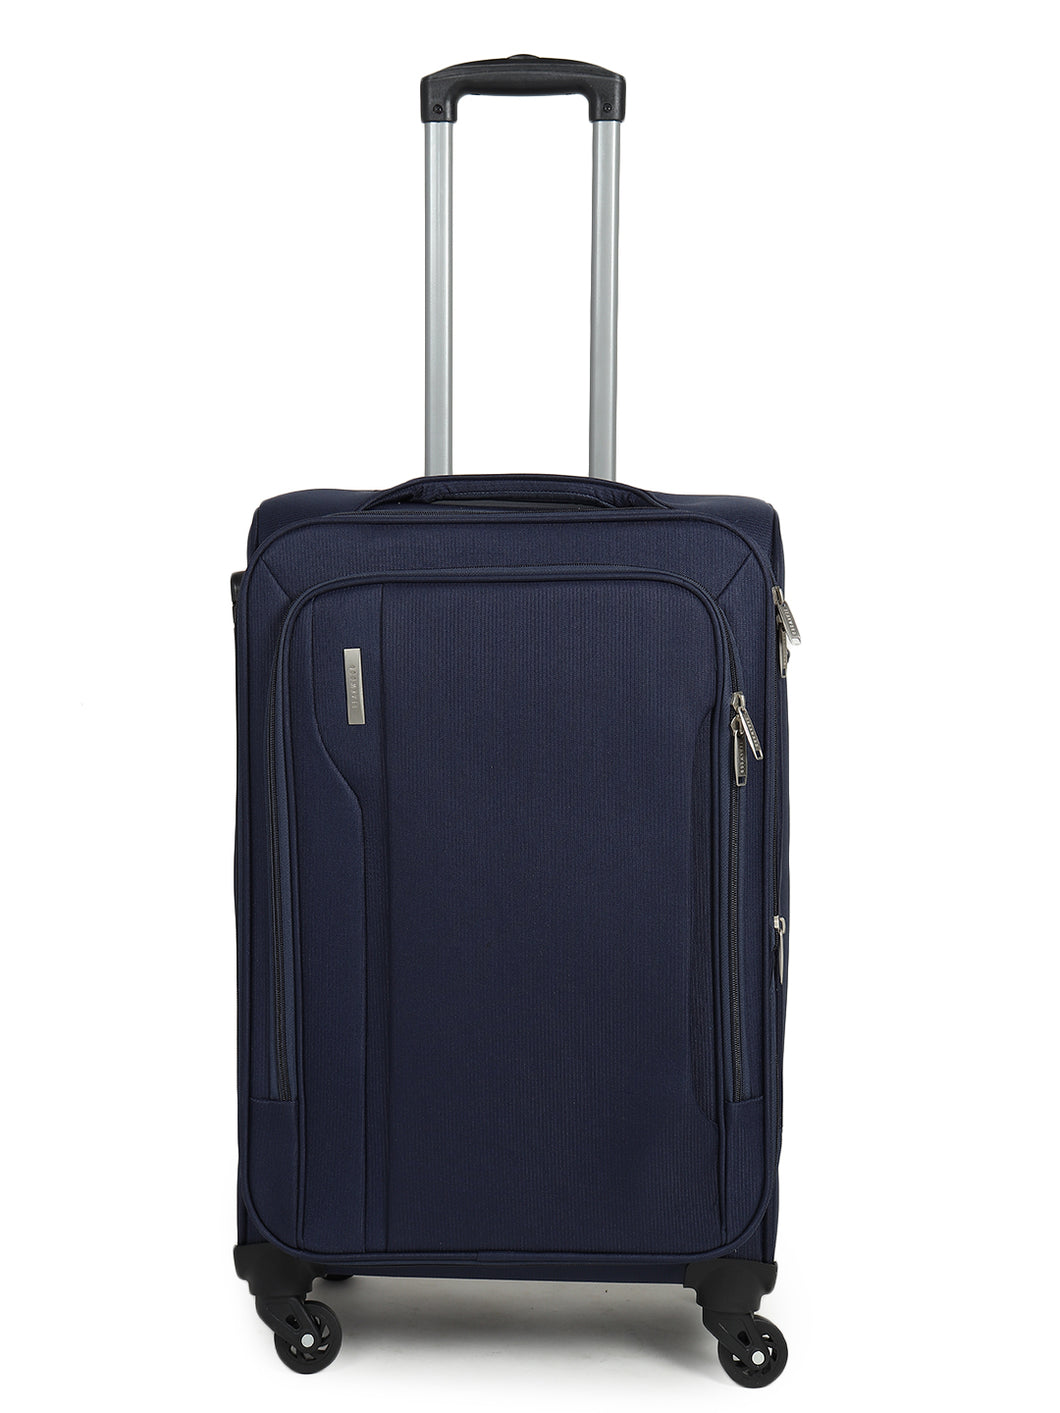 Unisex Blue Solid Soft-sided Trolley Suitcase